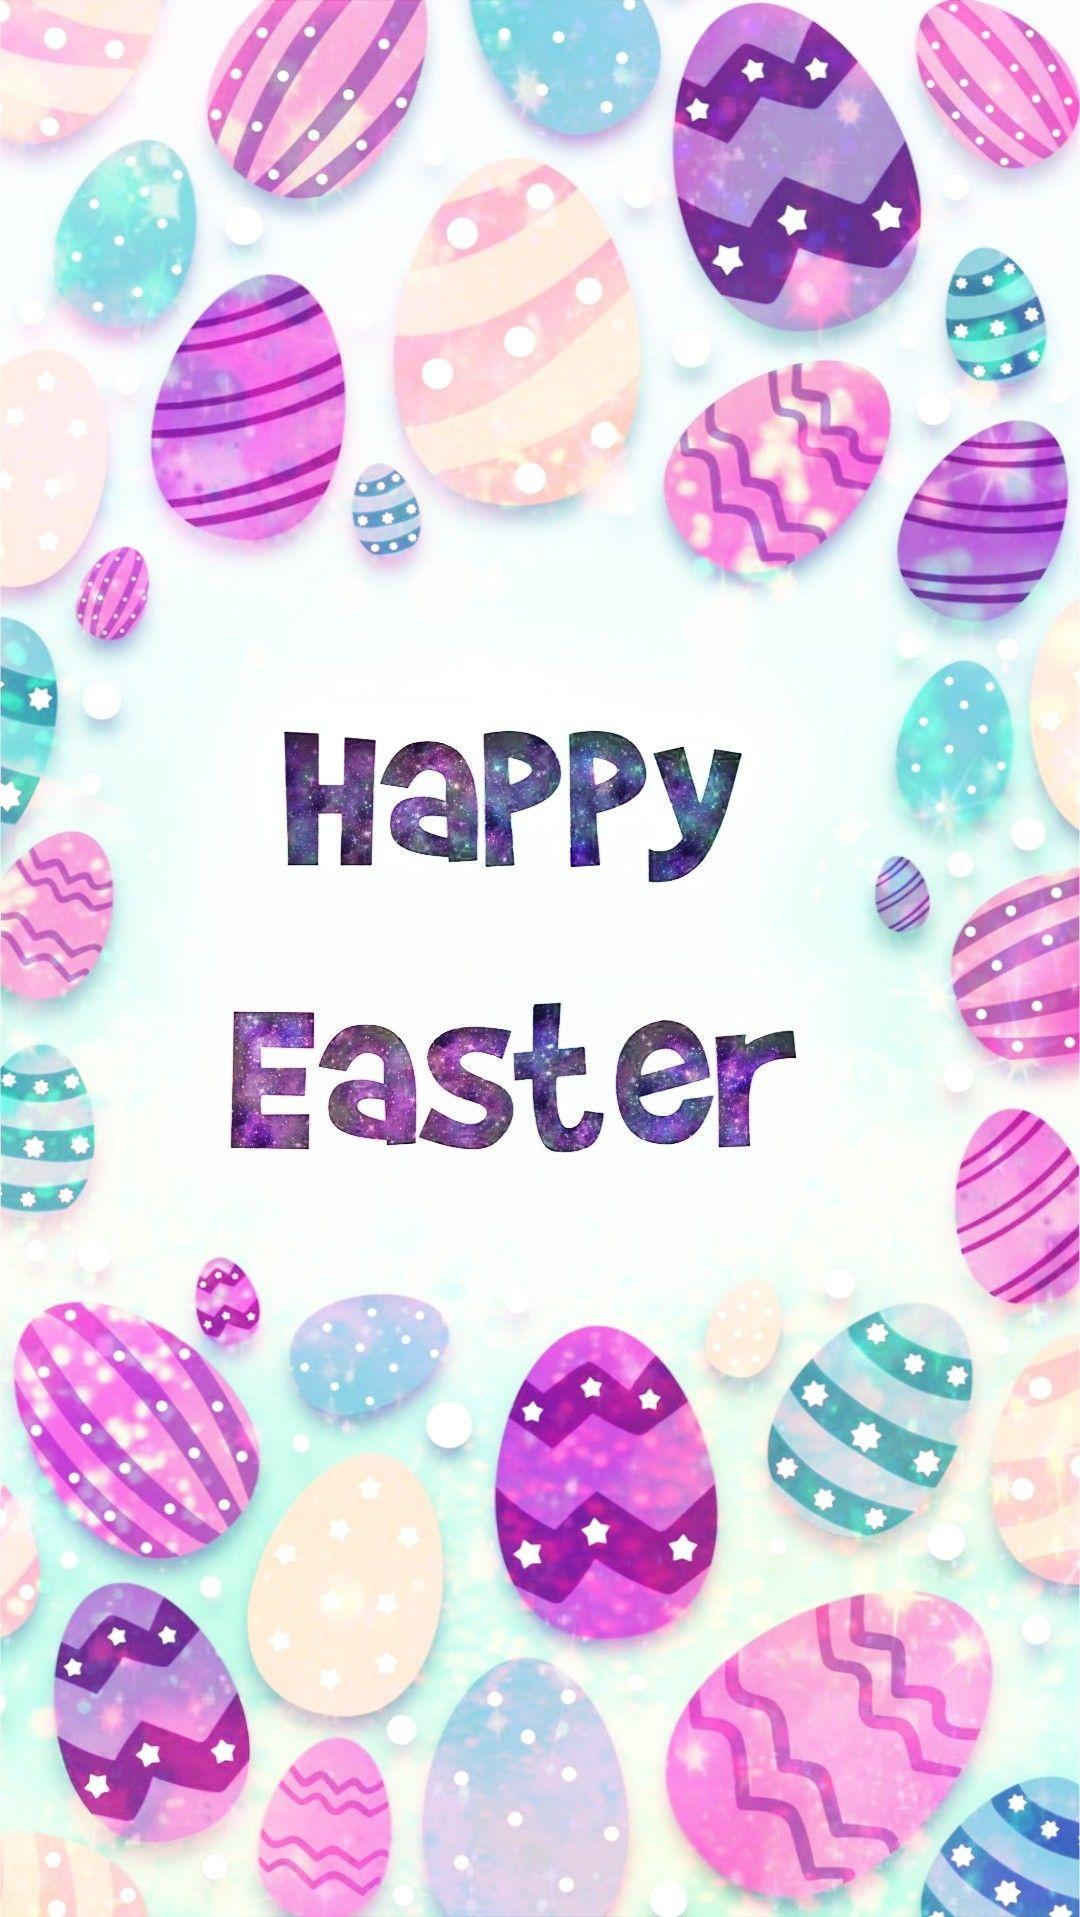 Glittery Happy Easter, made by me #patterns #purple #glitter #sparkles #galaxy #wallpaper #bac. Happy easter wallpaper, Easter wallpaper, iPhone wallpaper easter